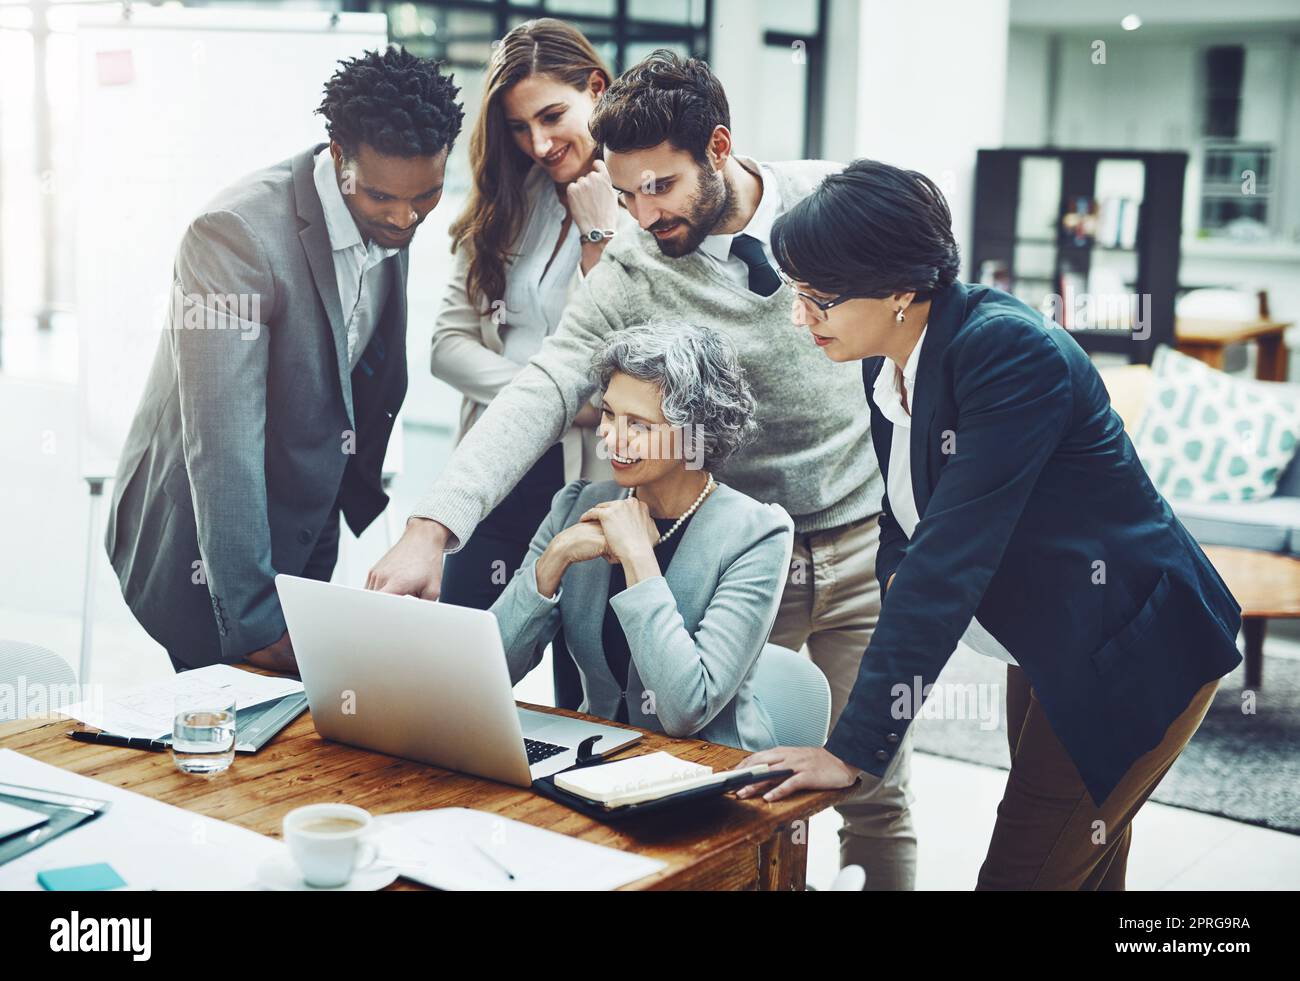 We make decisions together. a corporate business team having a meeting in their office. Stock Photo